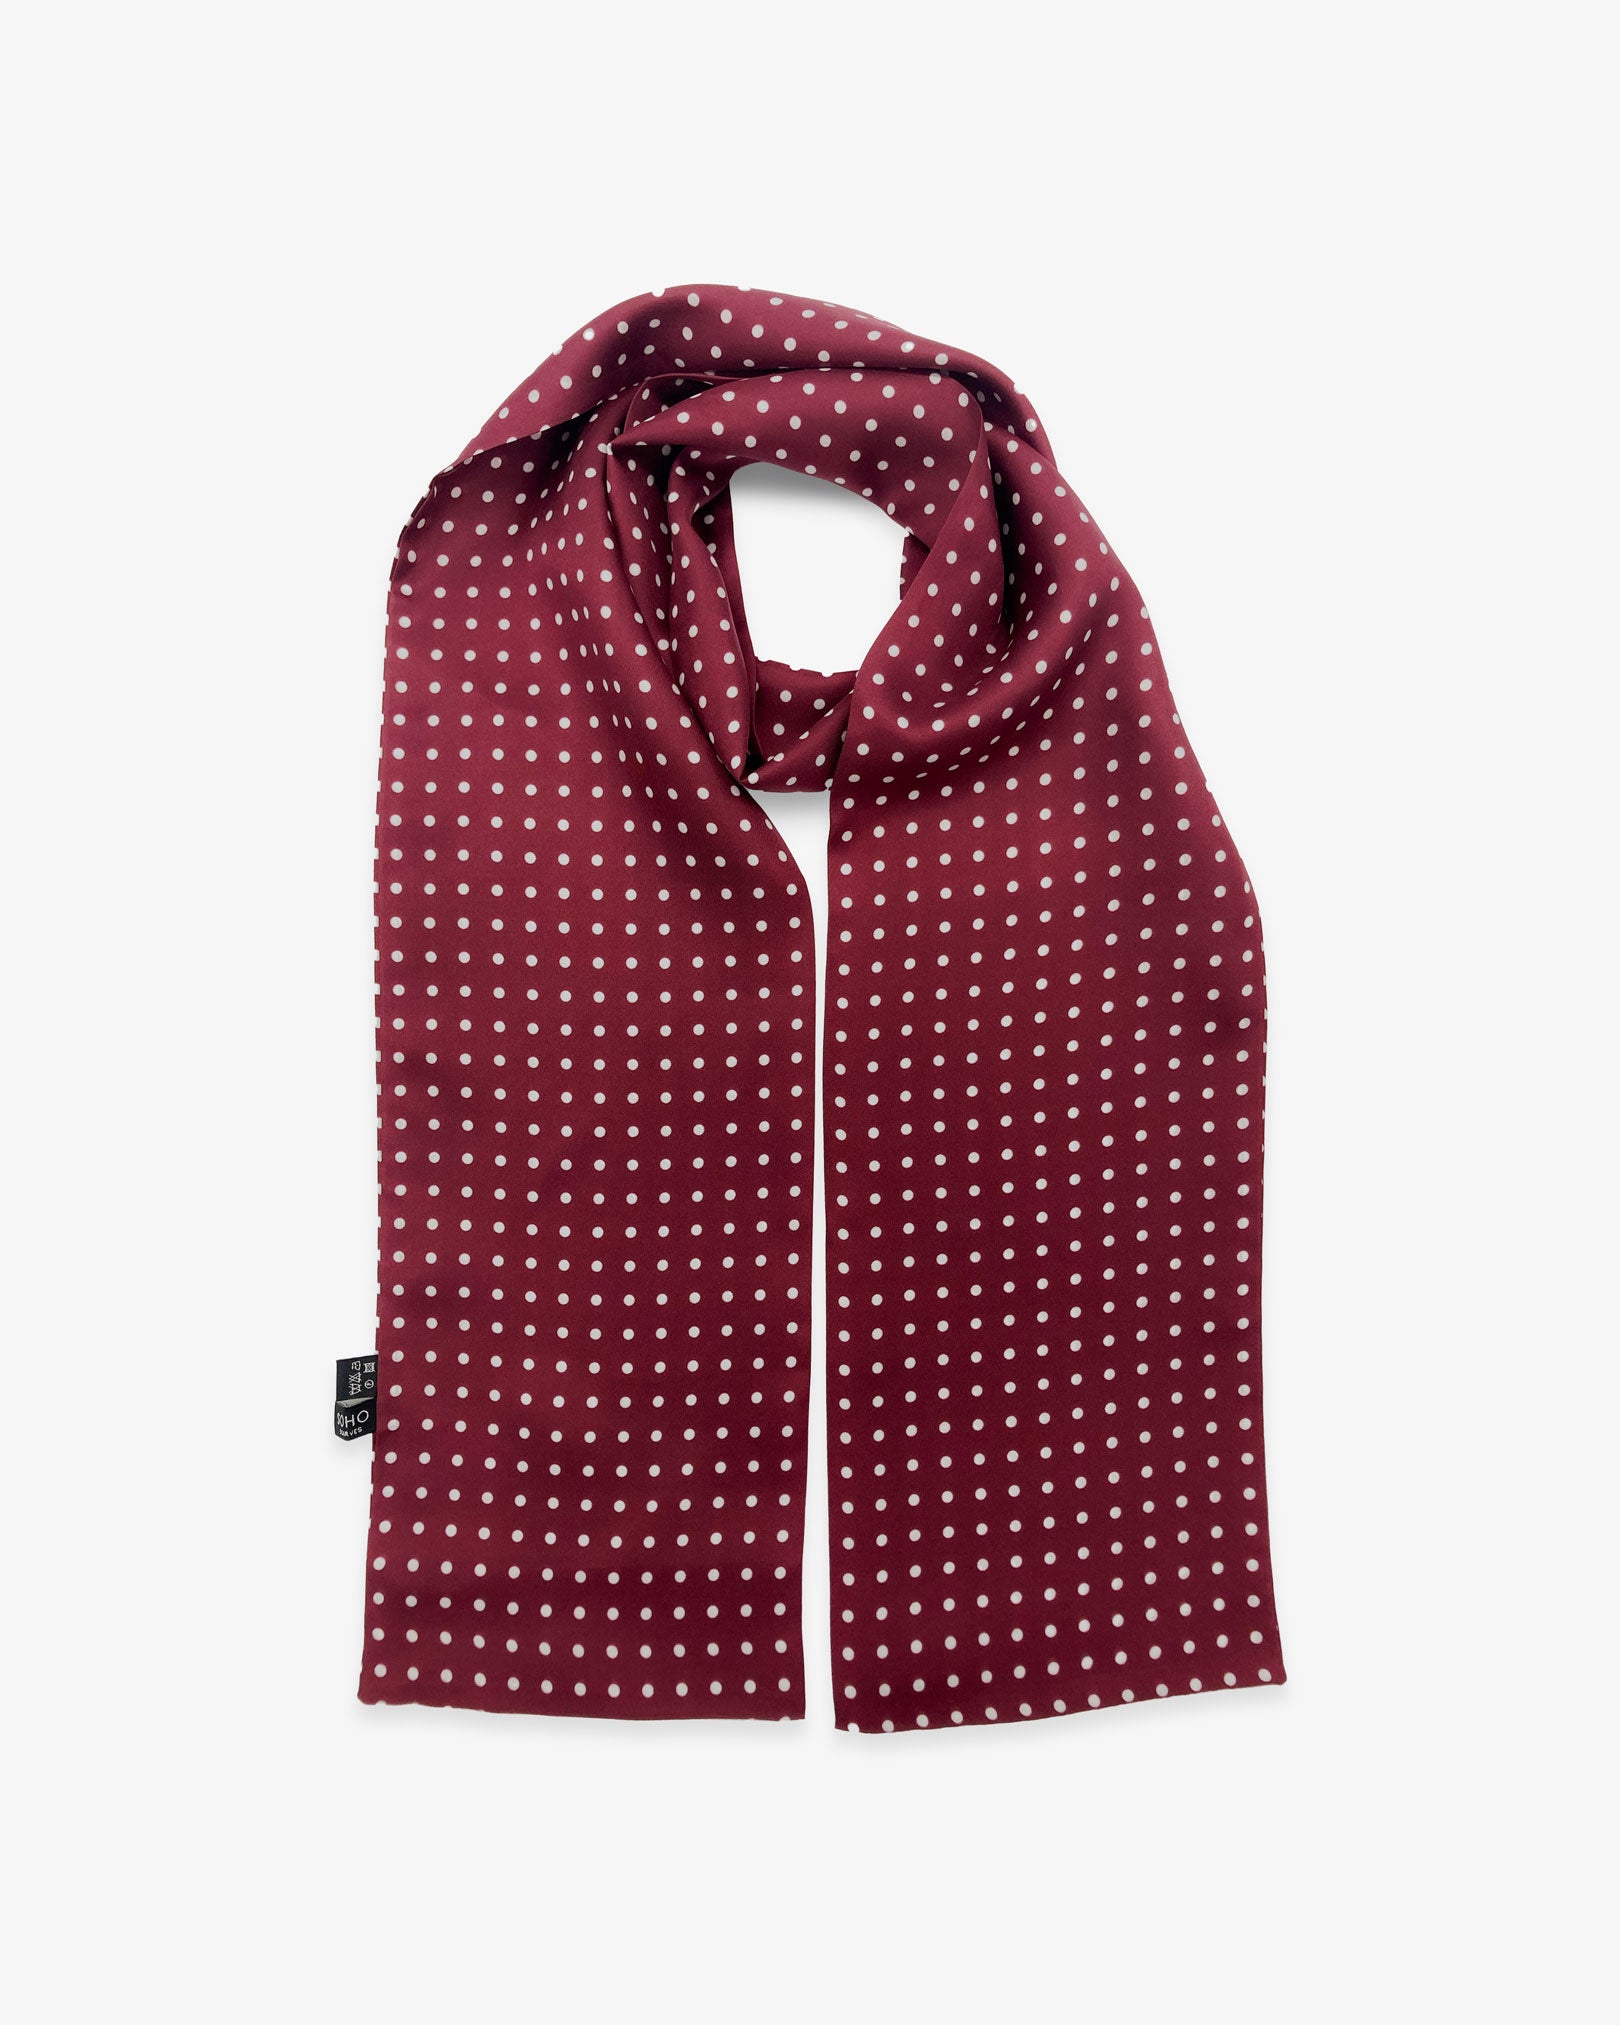 The Sapporo pure silk scarf looped in middle with both ends parallel showing the polka dot design in deep maroon with white dots.